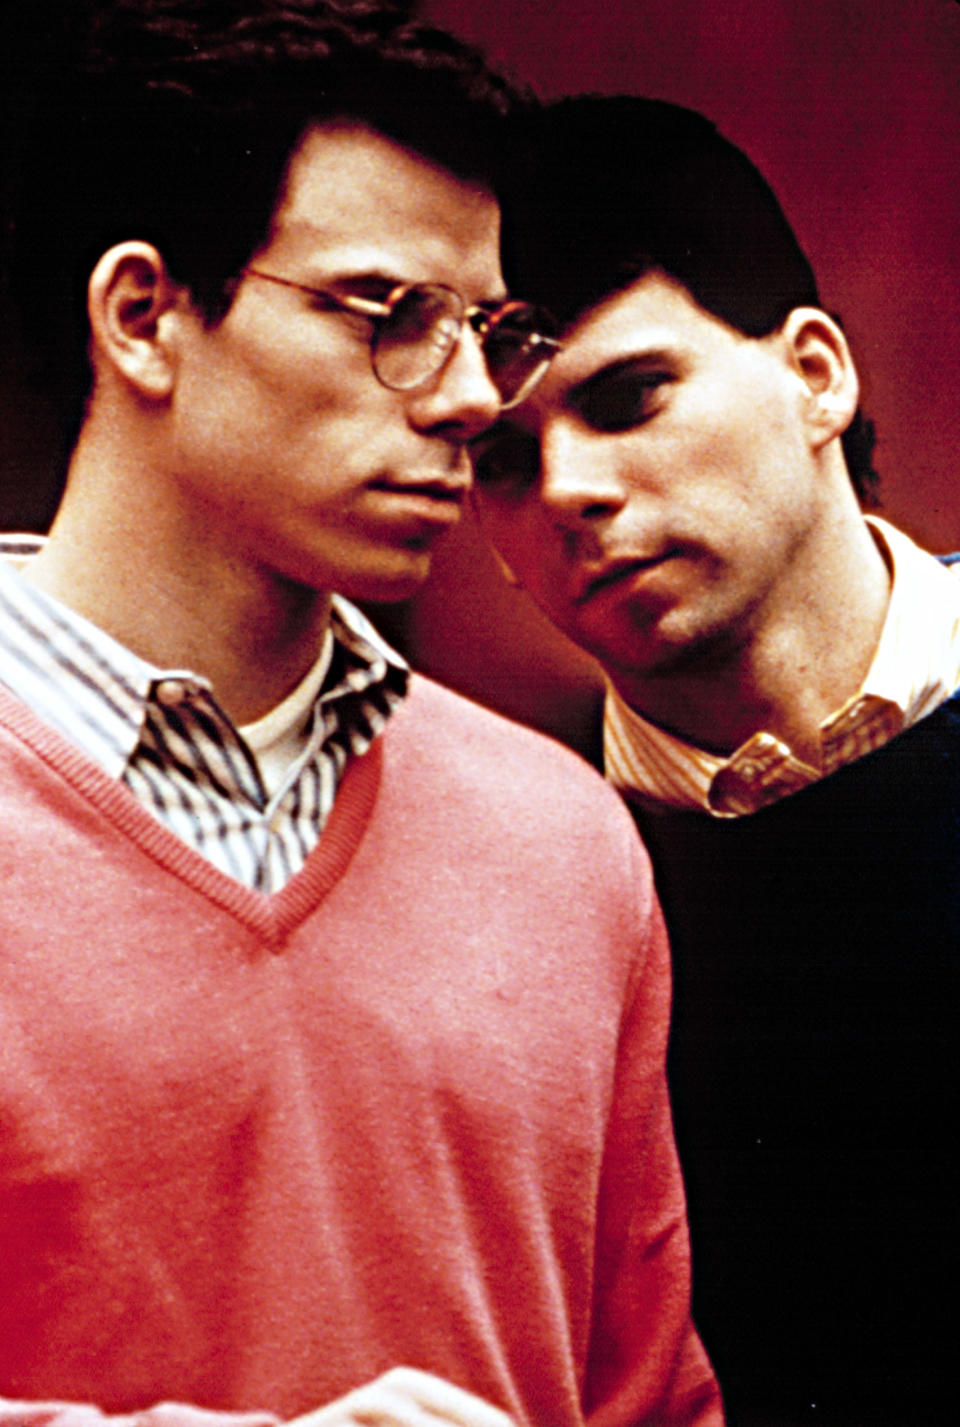 MENENDEZ BROTHERS, Erik and Lyle Menendez, at the 1993-1994 trial on Court TV, for the murders of their parents on August 20, 1989. A second trial from 1995.1996 would finally convict both brothers to life in prison, without parole.